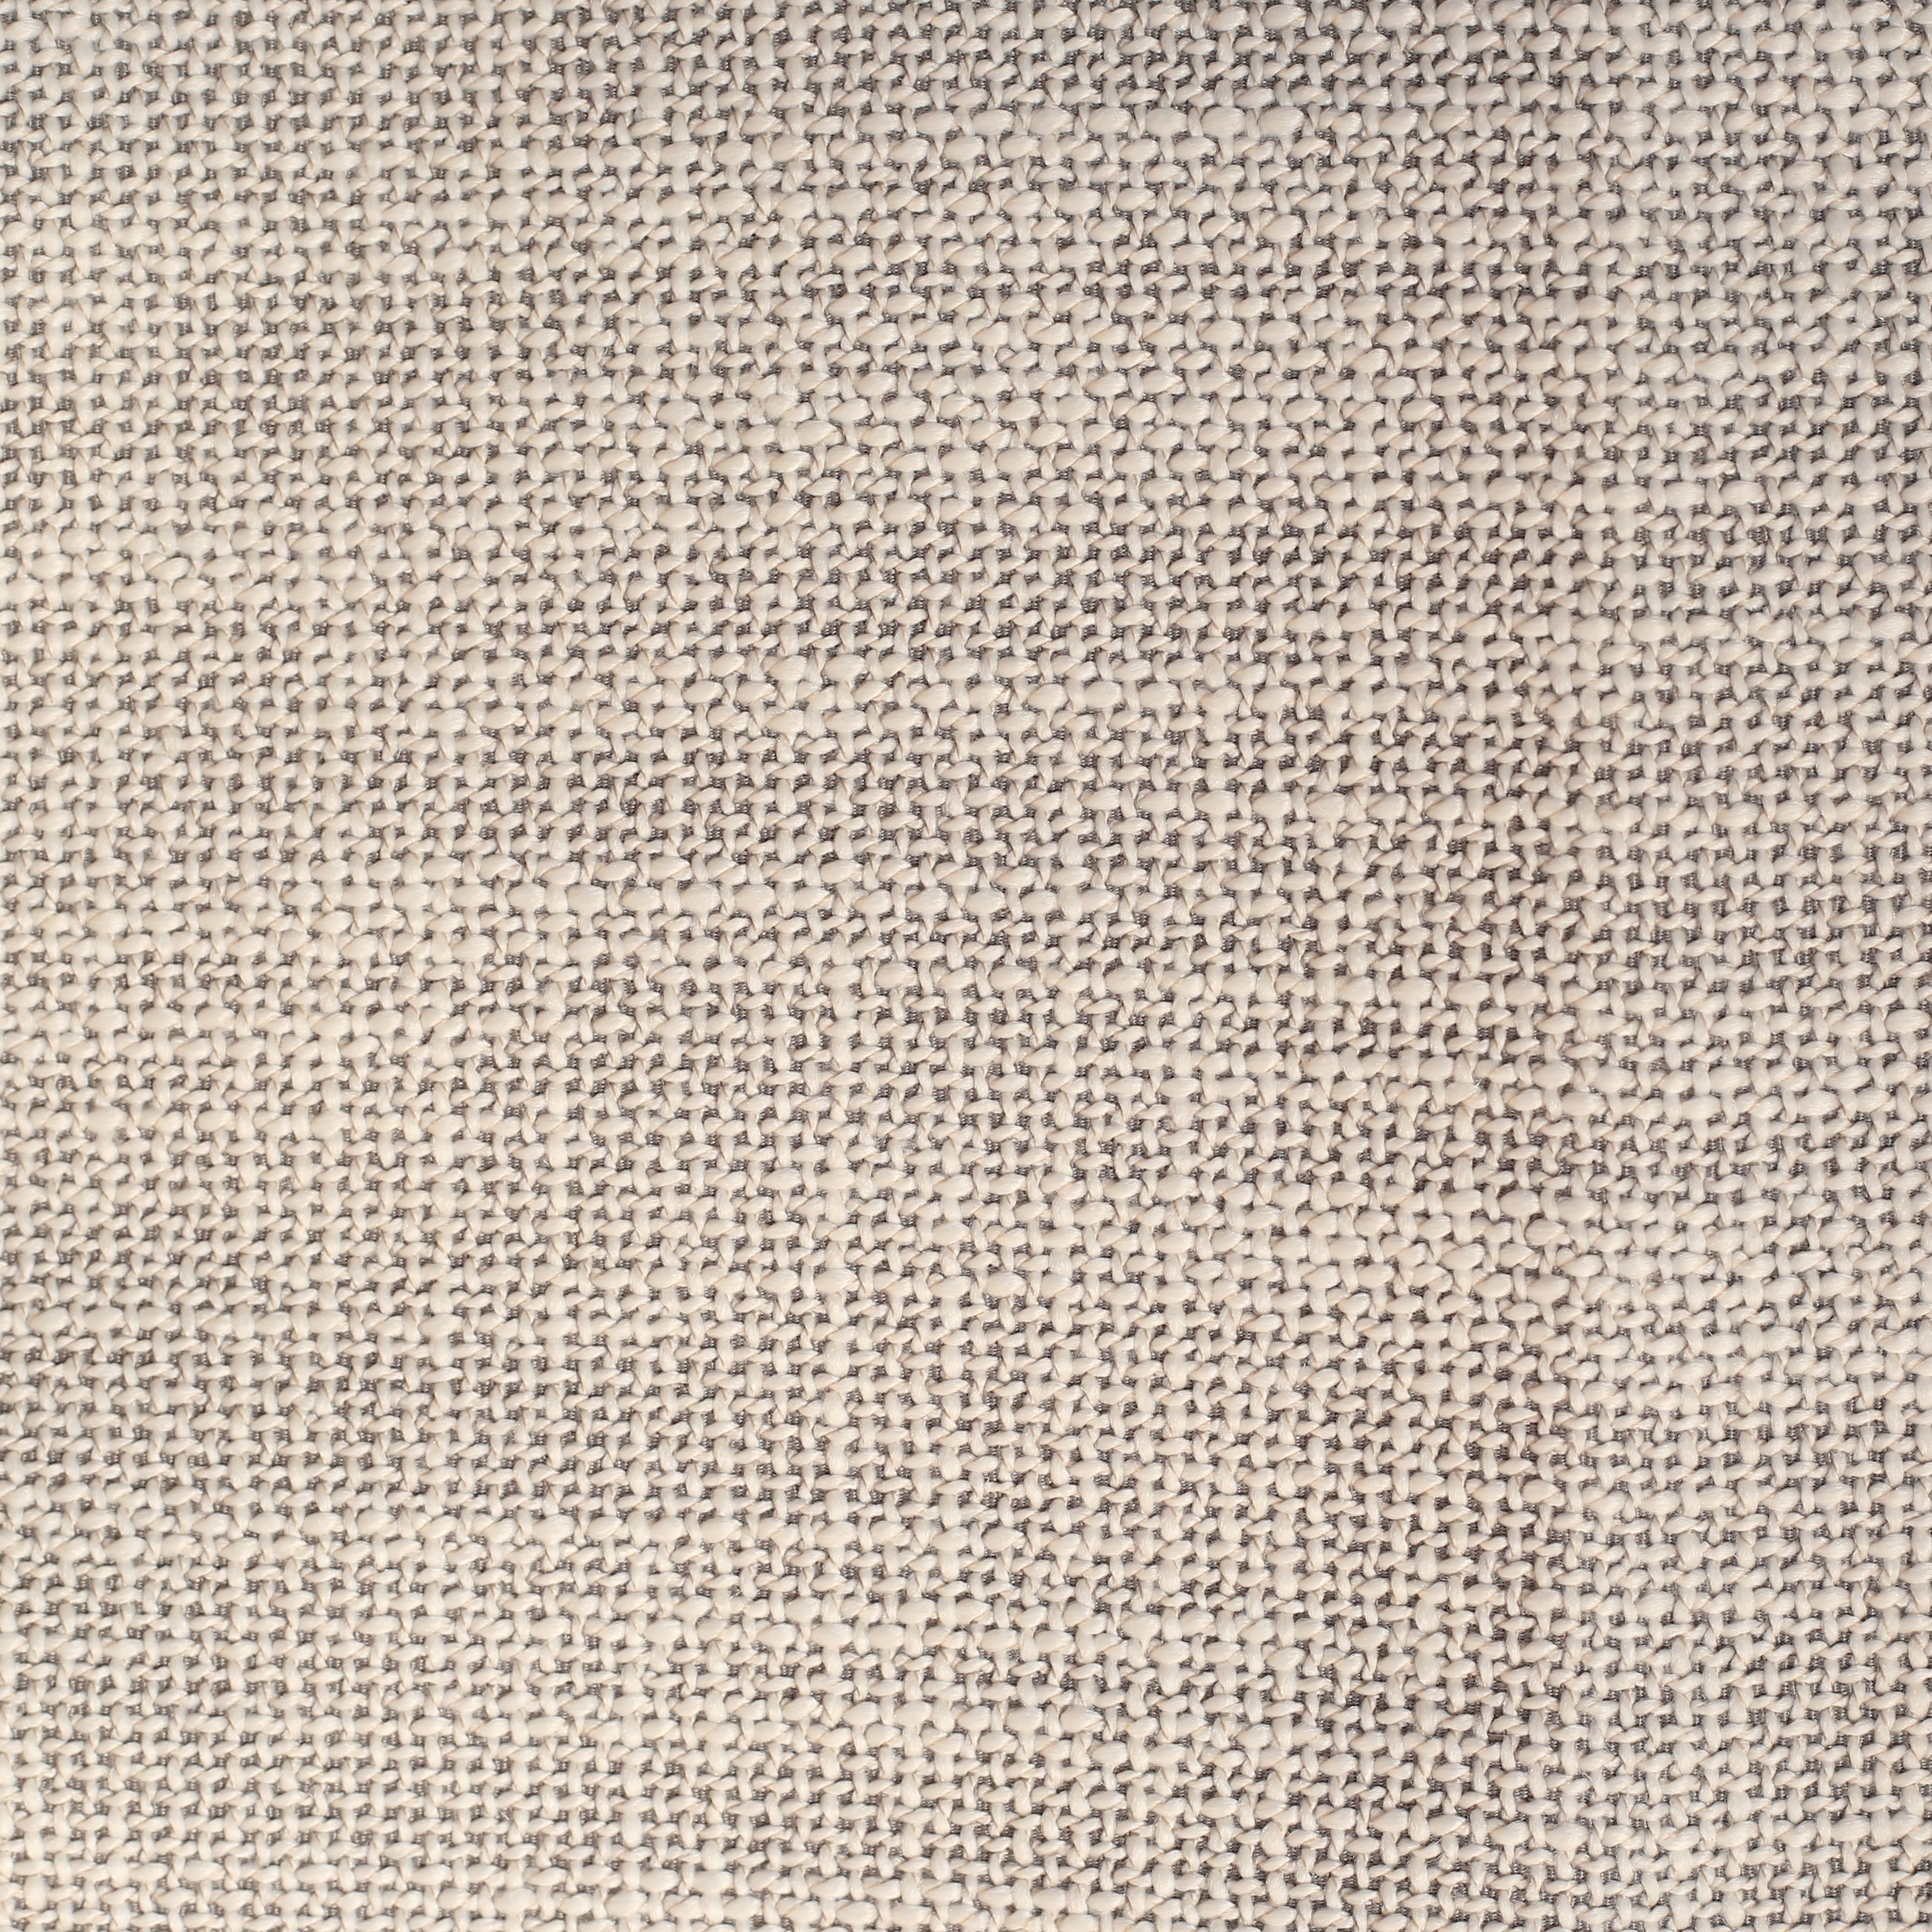 Century Furniture, Sunbrella Fabric Elements Action Taupe 44285-0003  Closeout Fabric by the Yard 